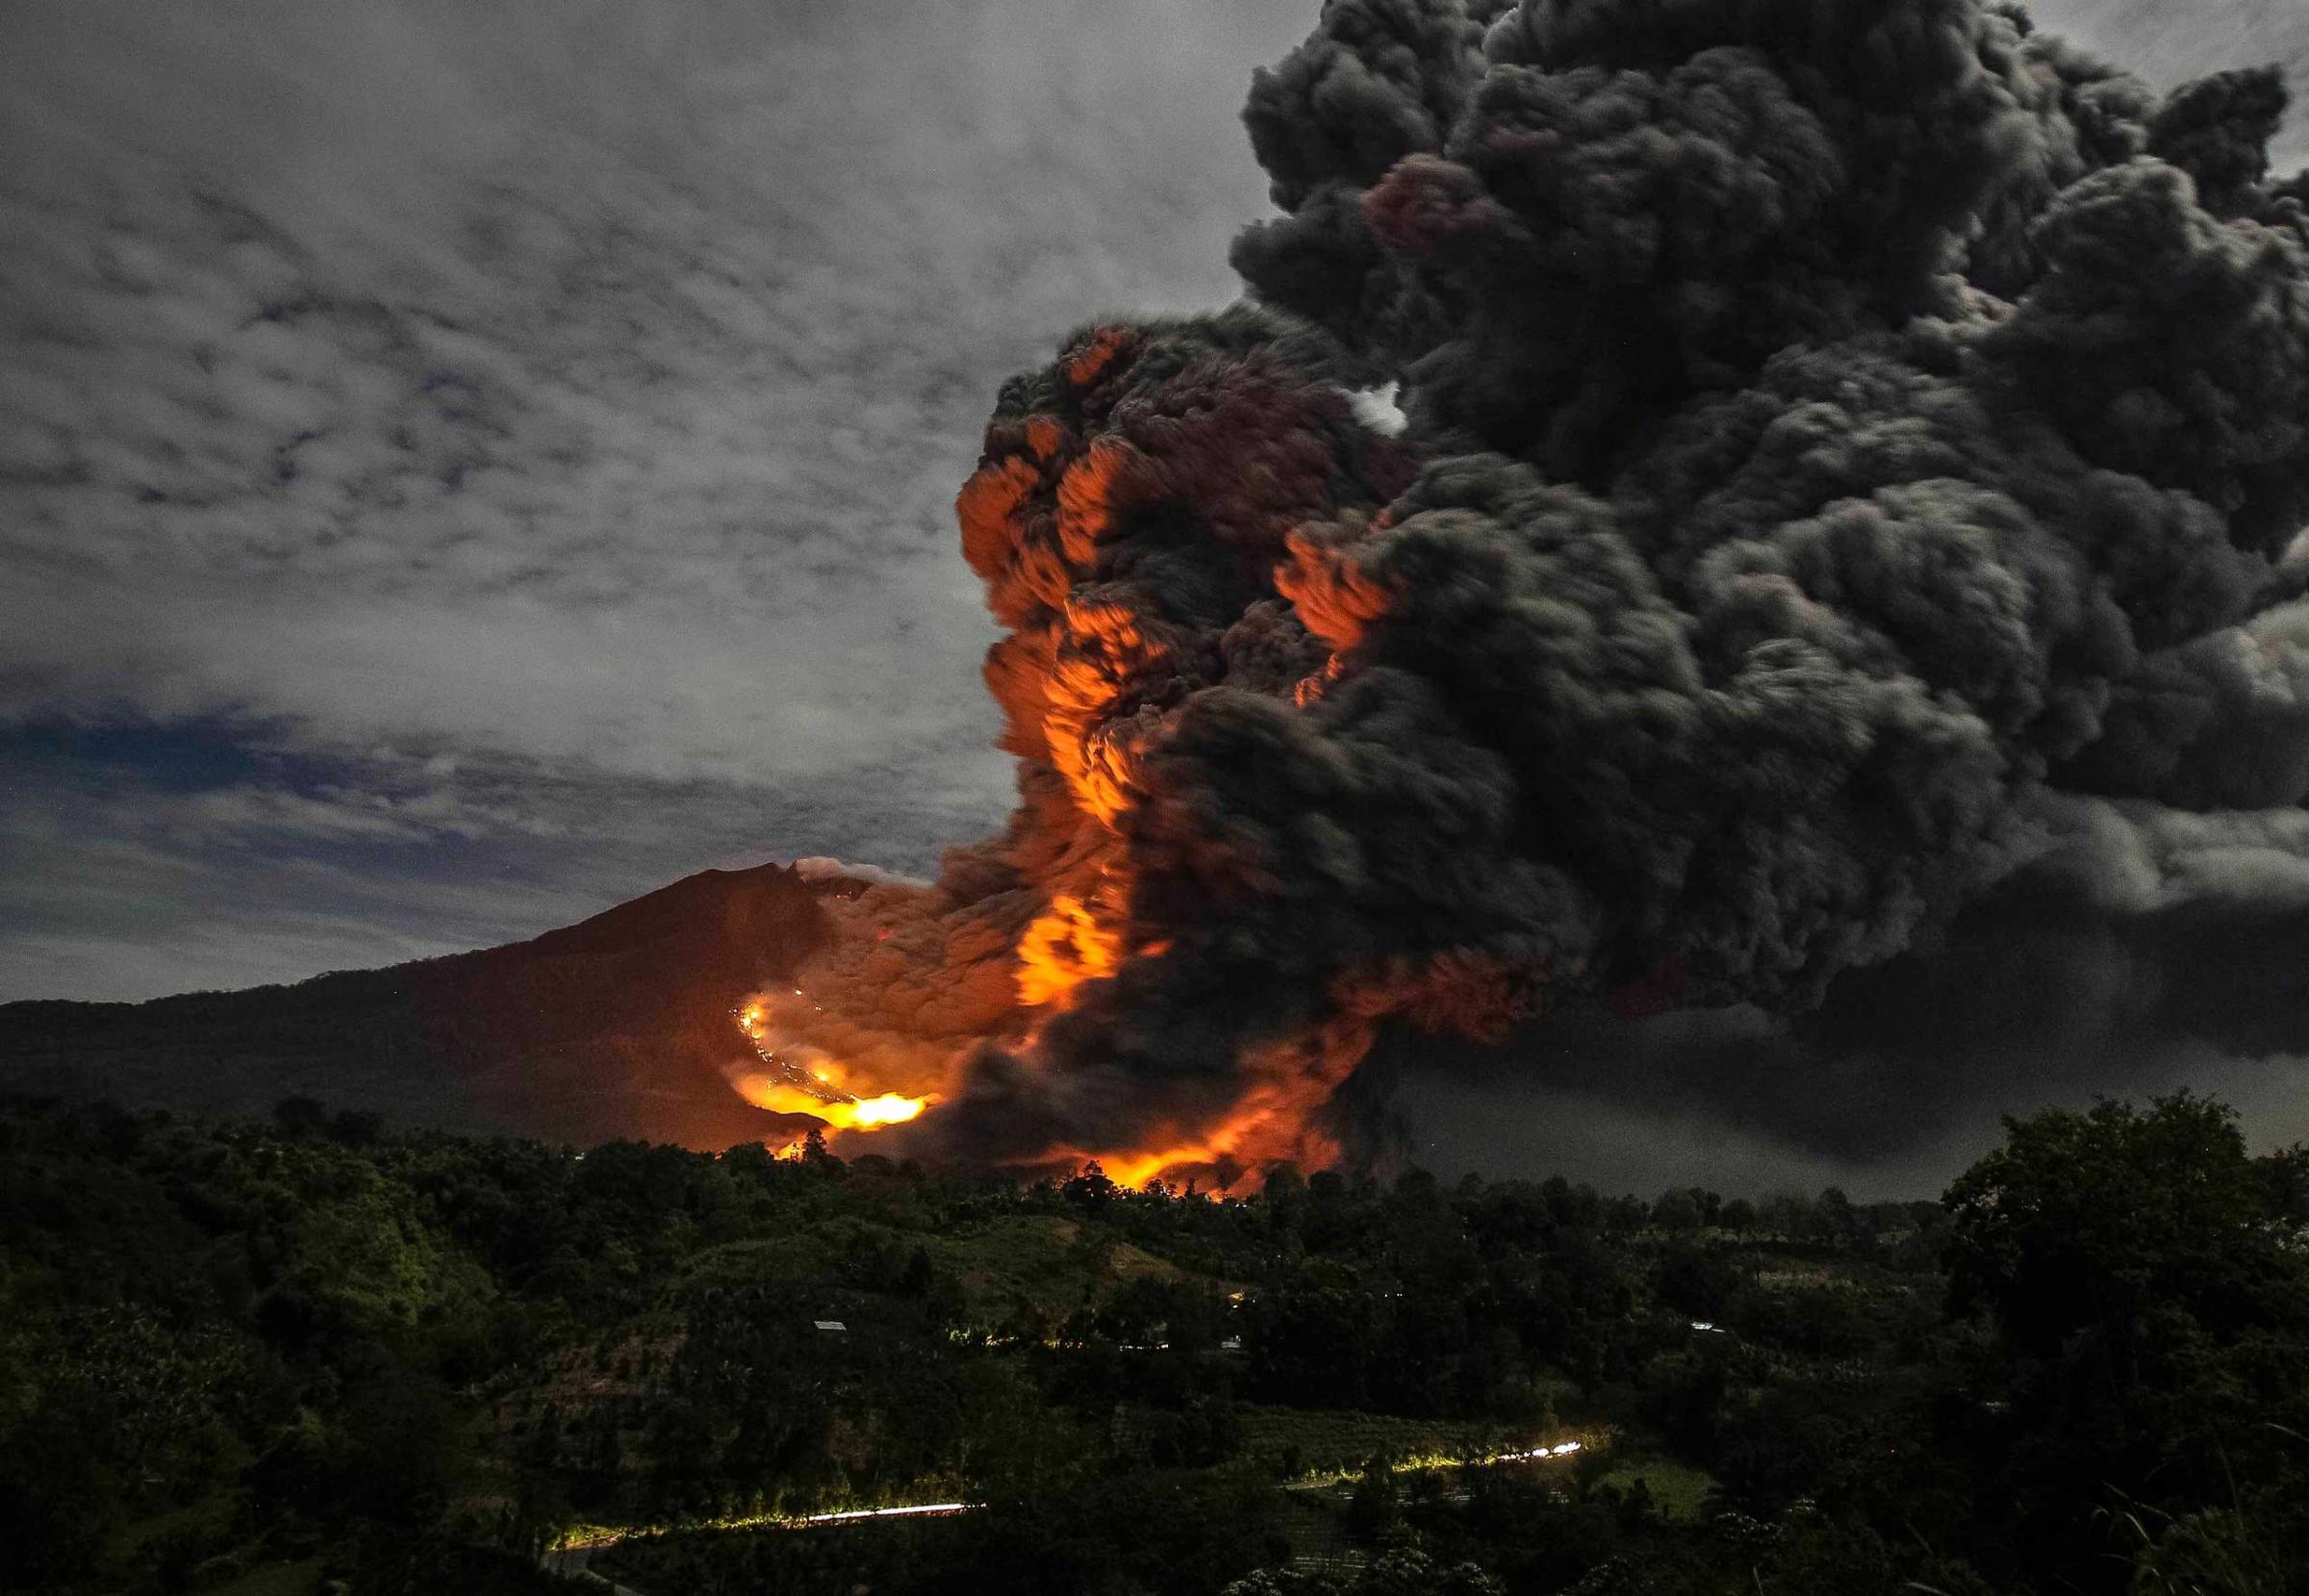 Mount Sinabung volcano erupts, as seen from Tiga Pancur village, Karo Regency in Indonesia's North Sumatra province on Oct. 8, 2014.